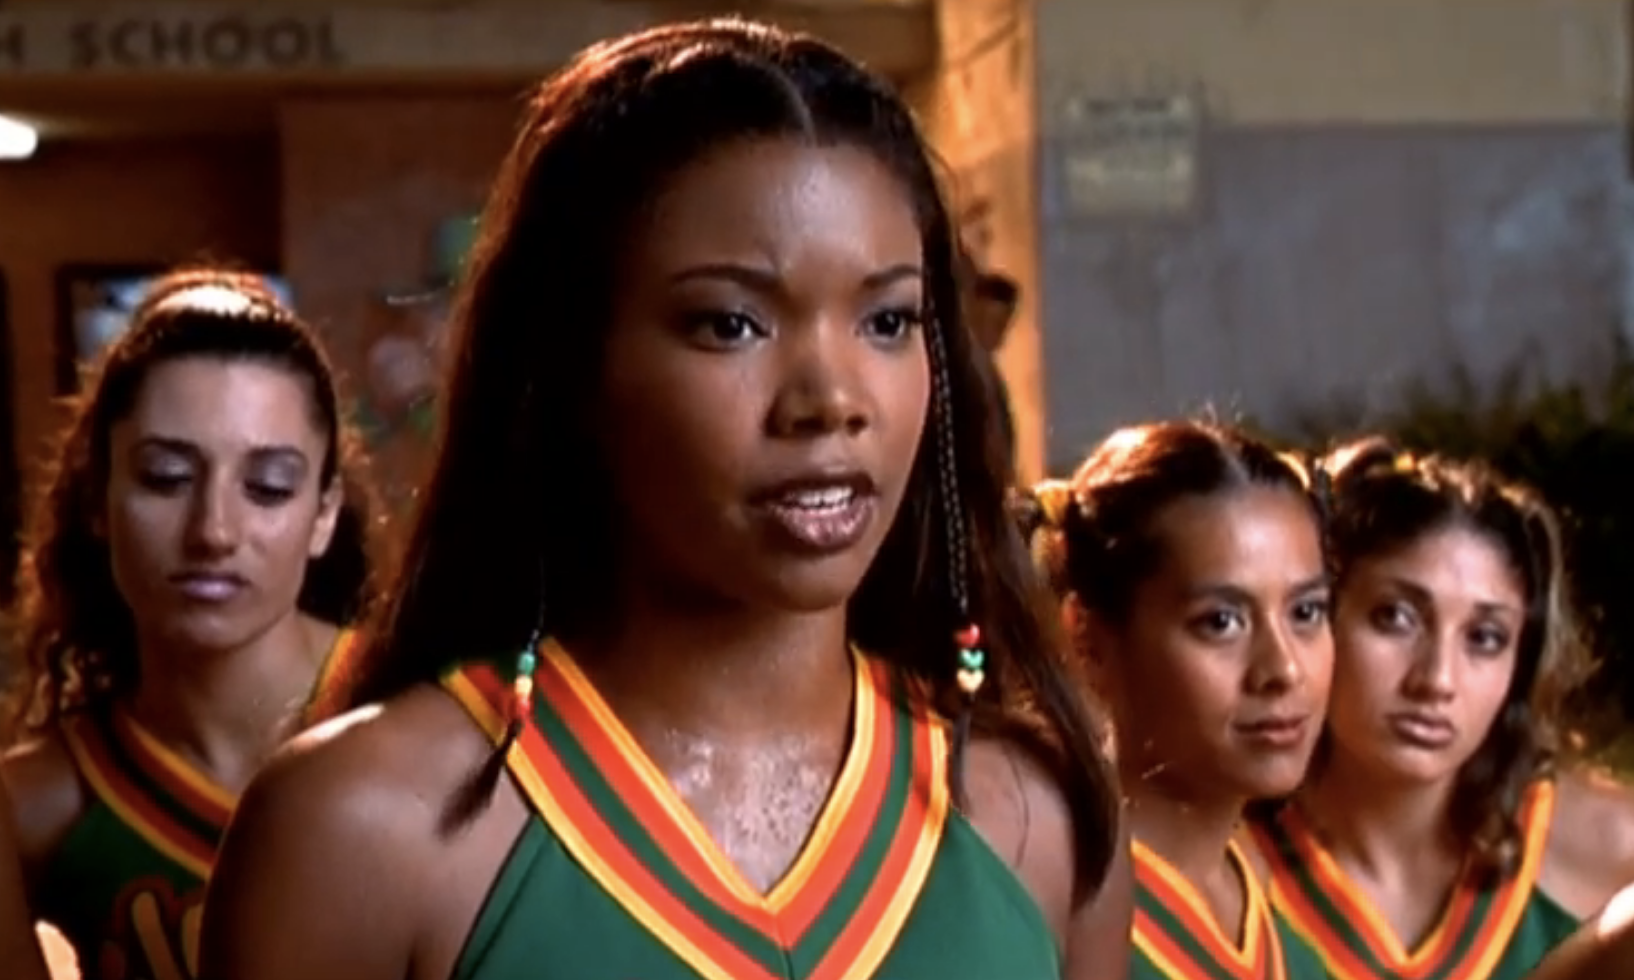 A scene from a movie showing Gabrielle Union as the character Isis with her cheerleading squad in the background